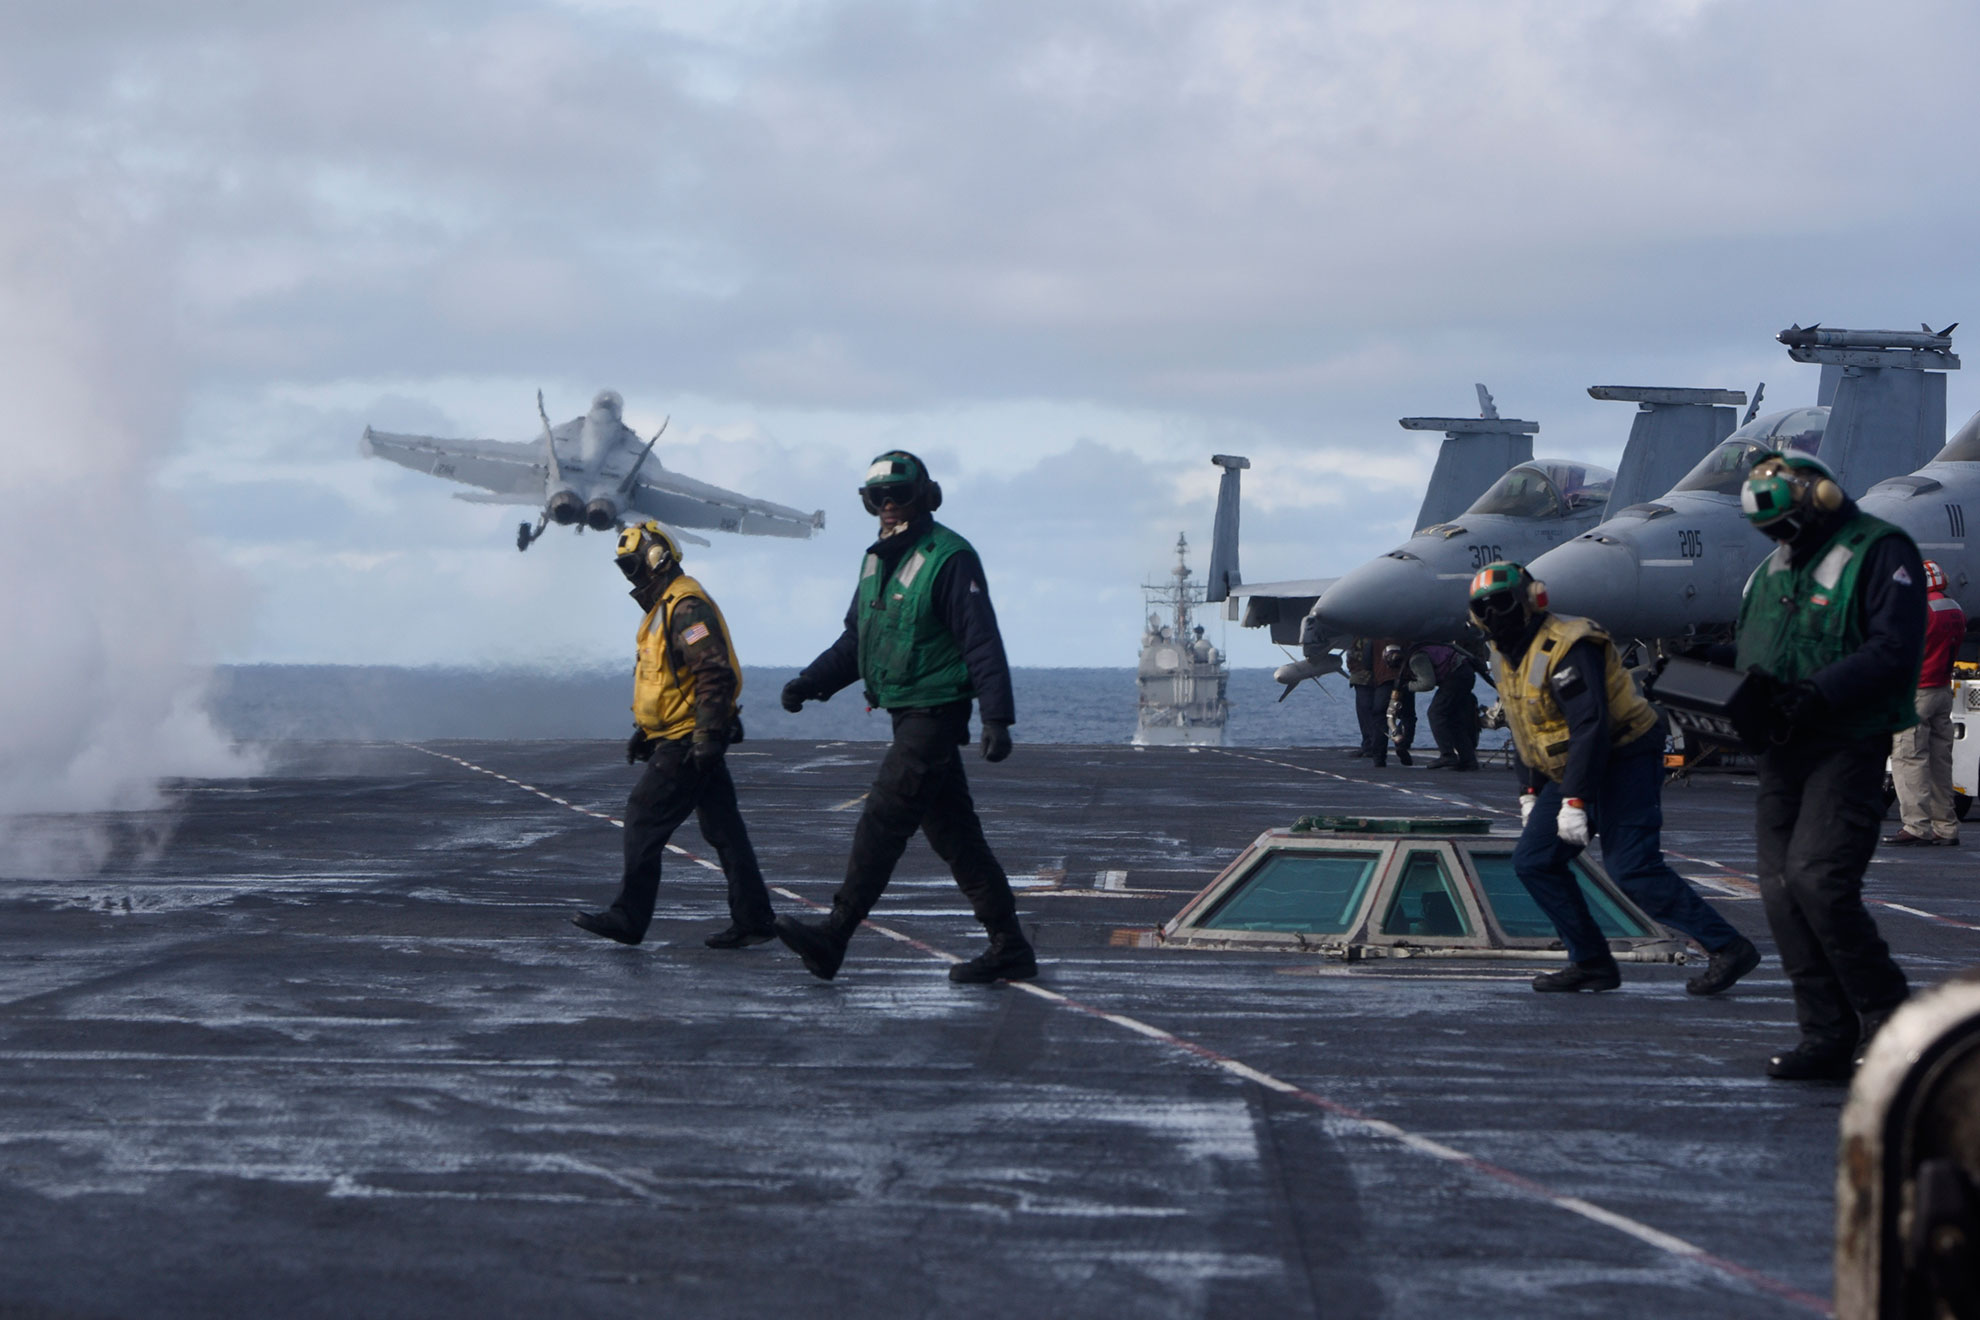 North Atlantic (Sept. 18, 2018) Sailors stand on the flight deck after launching an F/A-18F Super Hornet assigned to the "Fighting Checkmates" of Strike Fighter Squadron (VFA) 211 aboard the Nimitz-class aircraft carrier USS Harry S. Truman (CVN 75) in the North Atlantic, Sept. 18, 2018. The Harry S. Truman Carrier Strike Group is deployed to the U.S. 6th Fleet area of operations, demonstrating commitment to regional allies and partners, combat power, and flexibility of U.S. naval forces to operate wherever and whenever the nation requires -- U.S. Navy photo by MCS2 Anthony Flynn. -